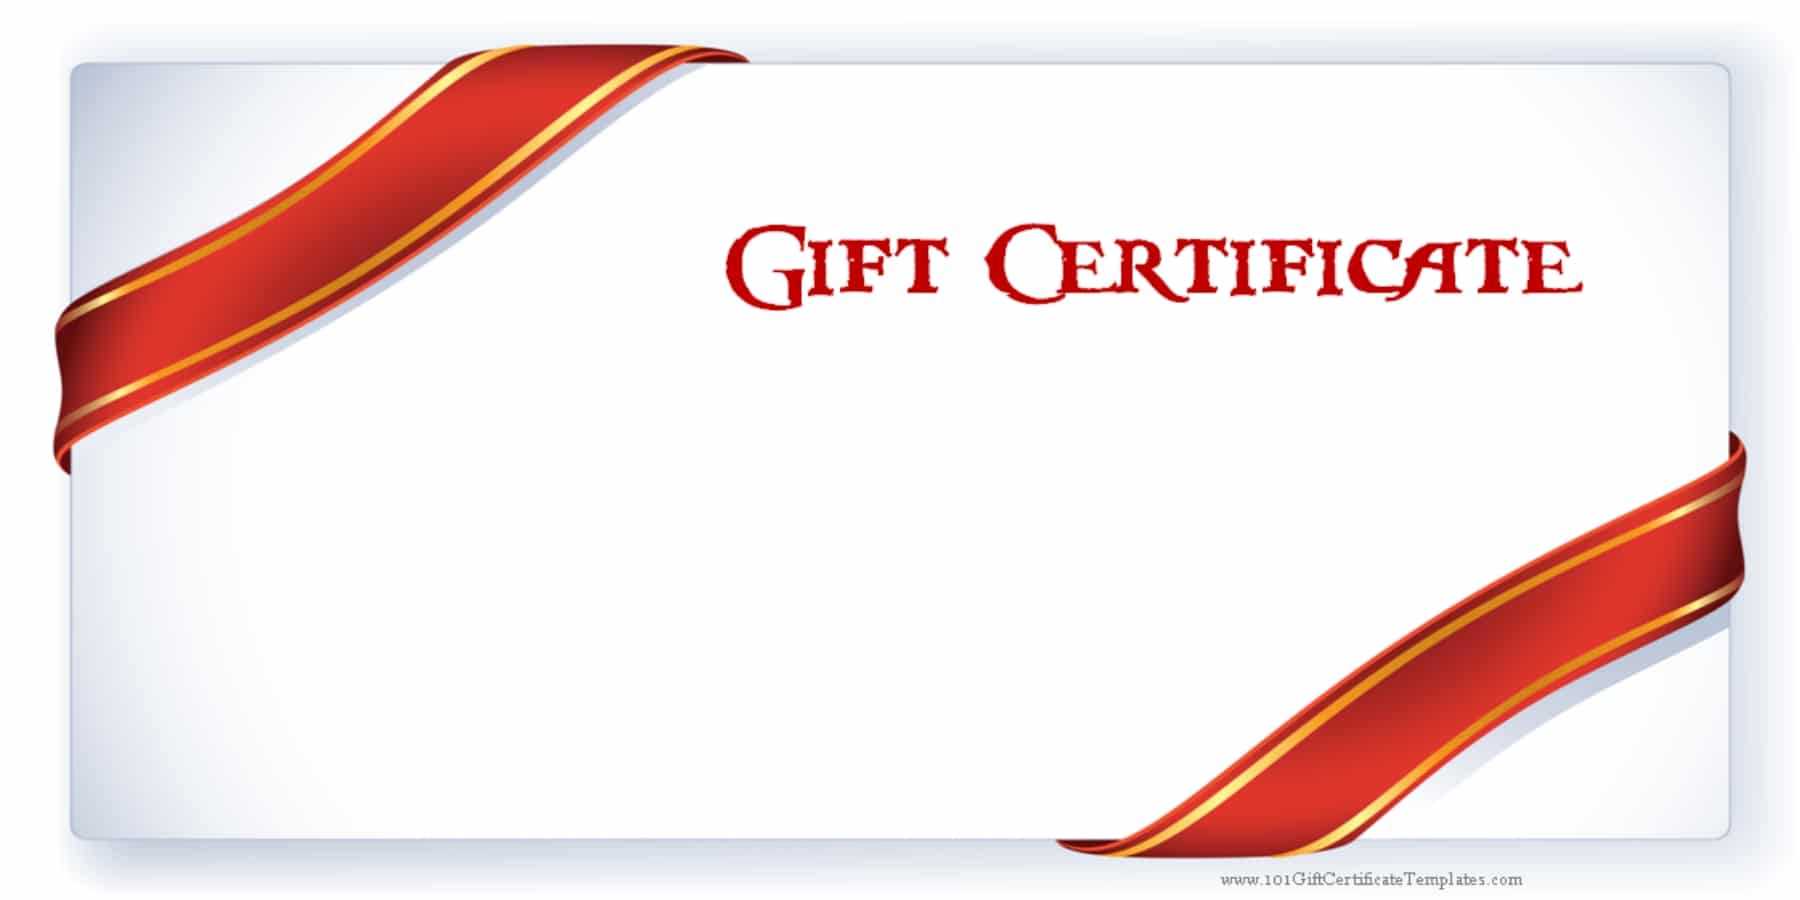 Printable Gift Certificate Templates Within Present Certificate Templates